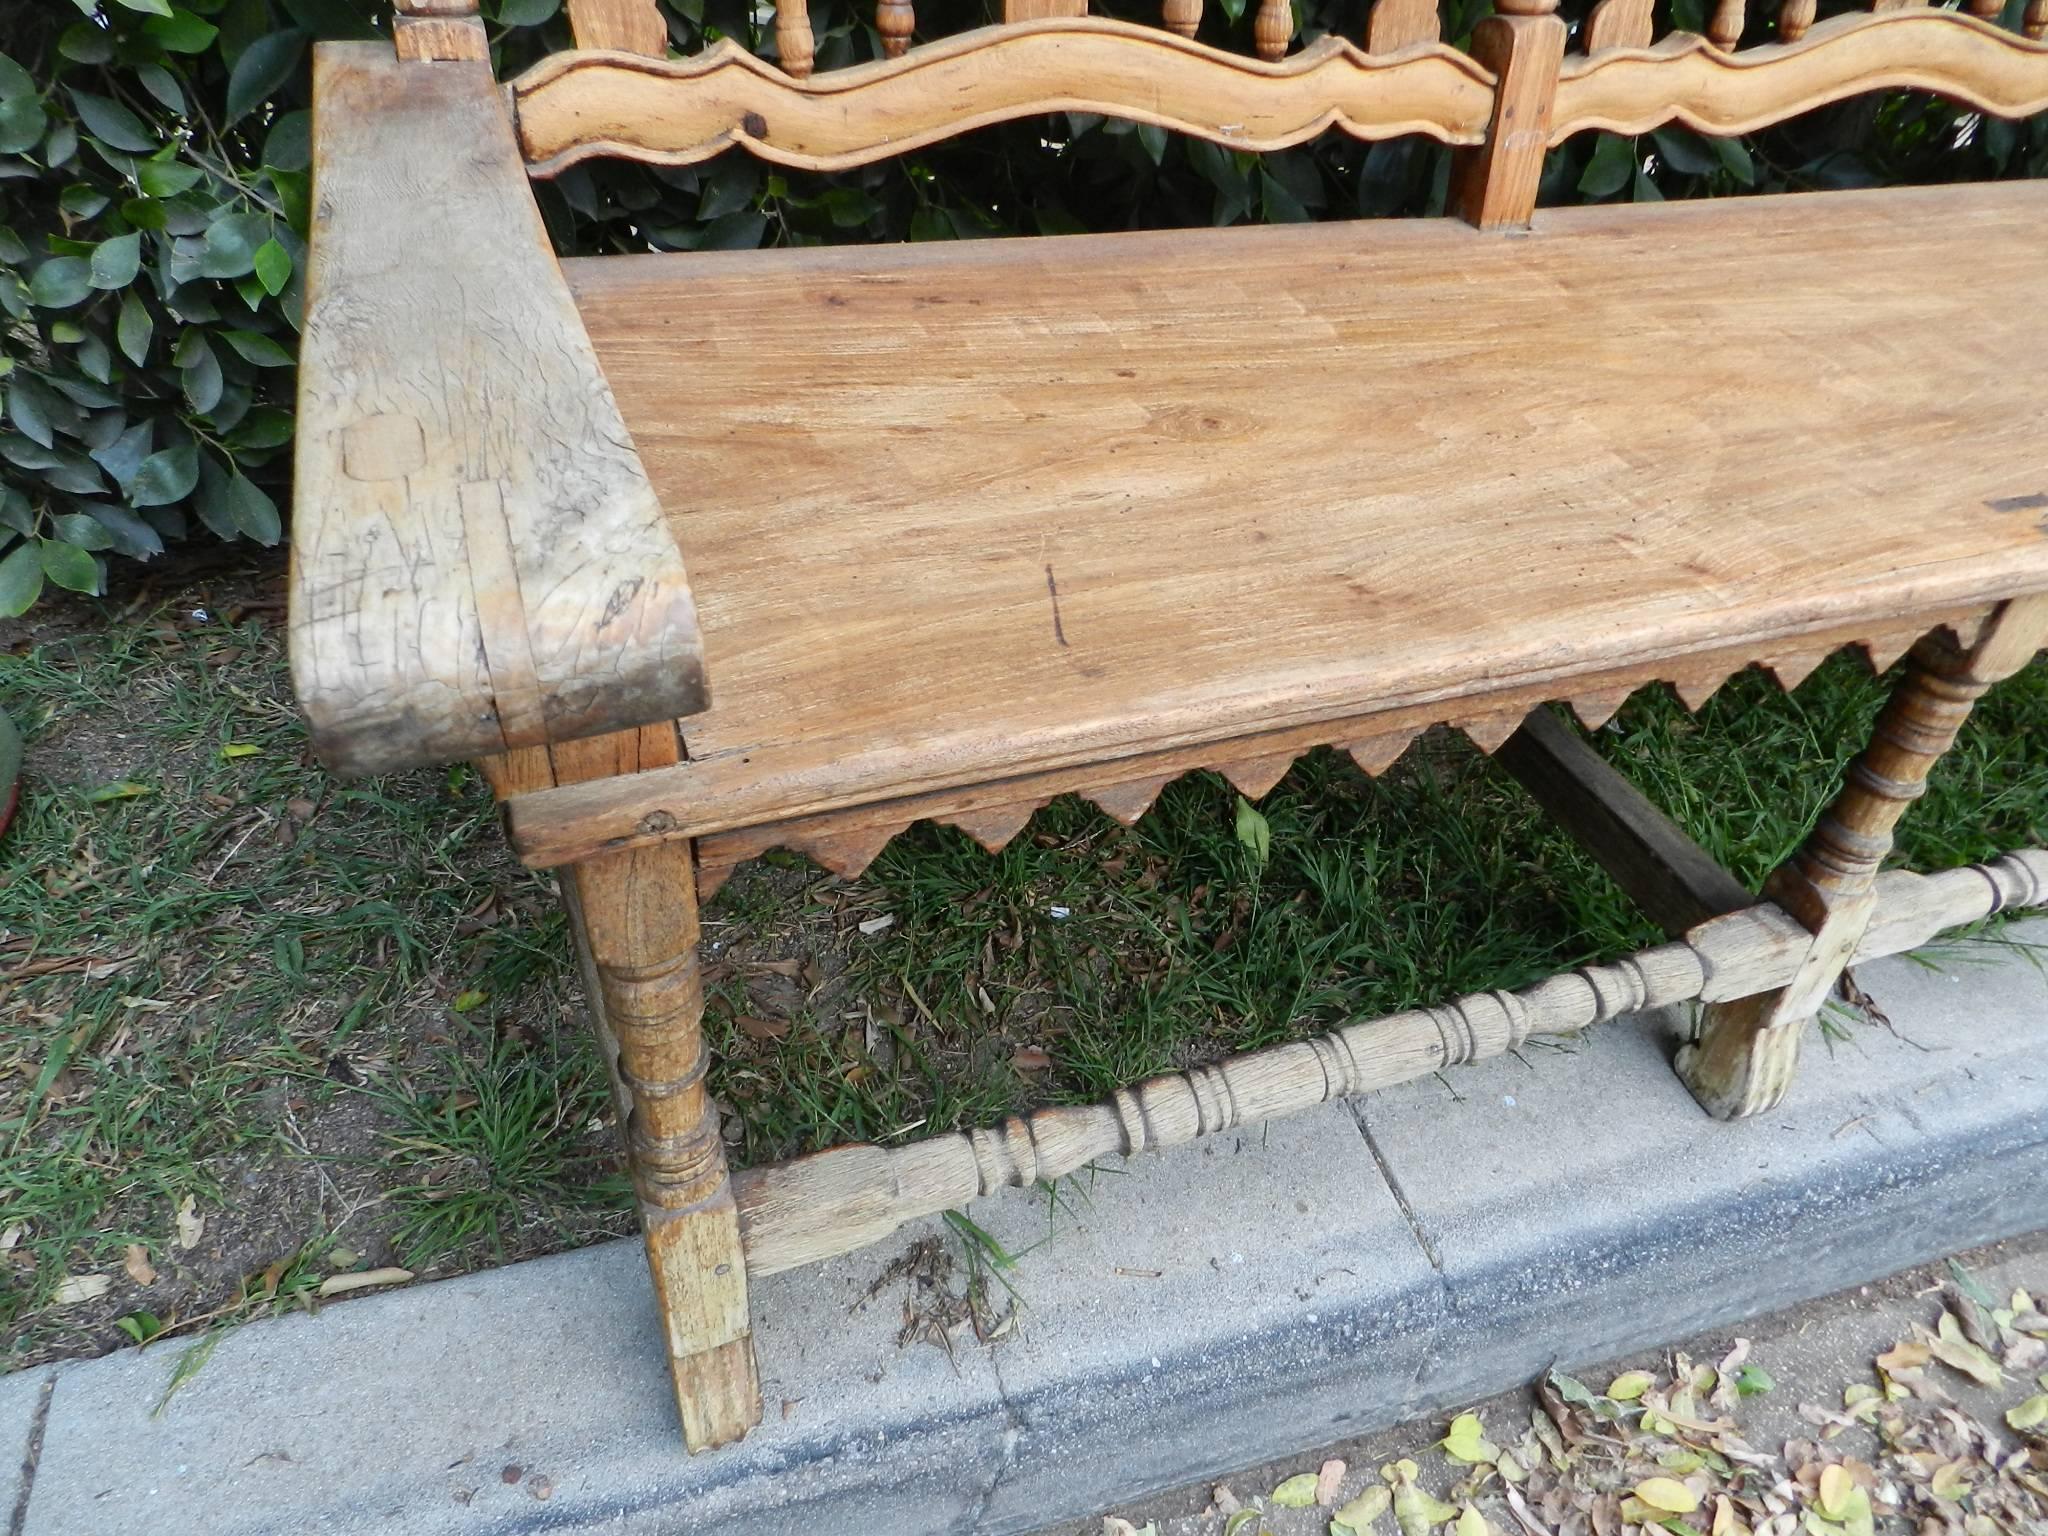 South American Antique 19th Century Sabino Wood or Pine Mexican Bench